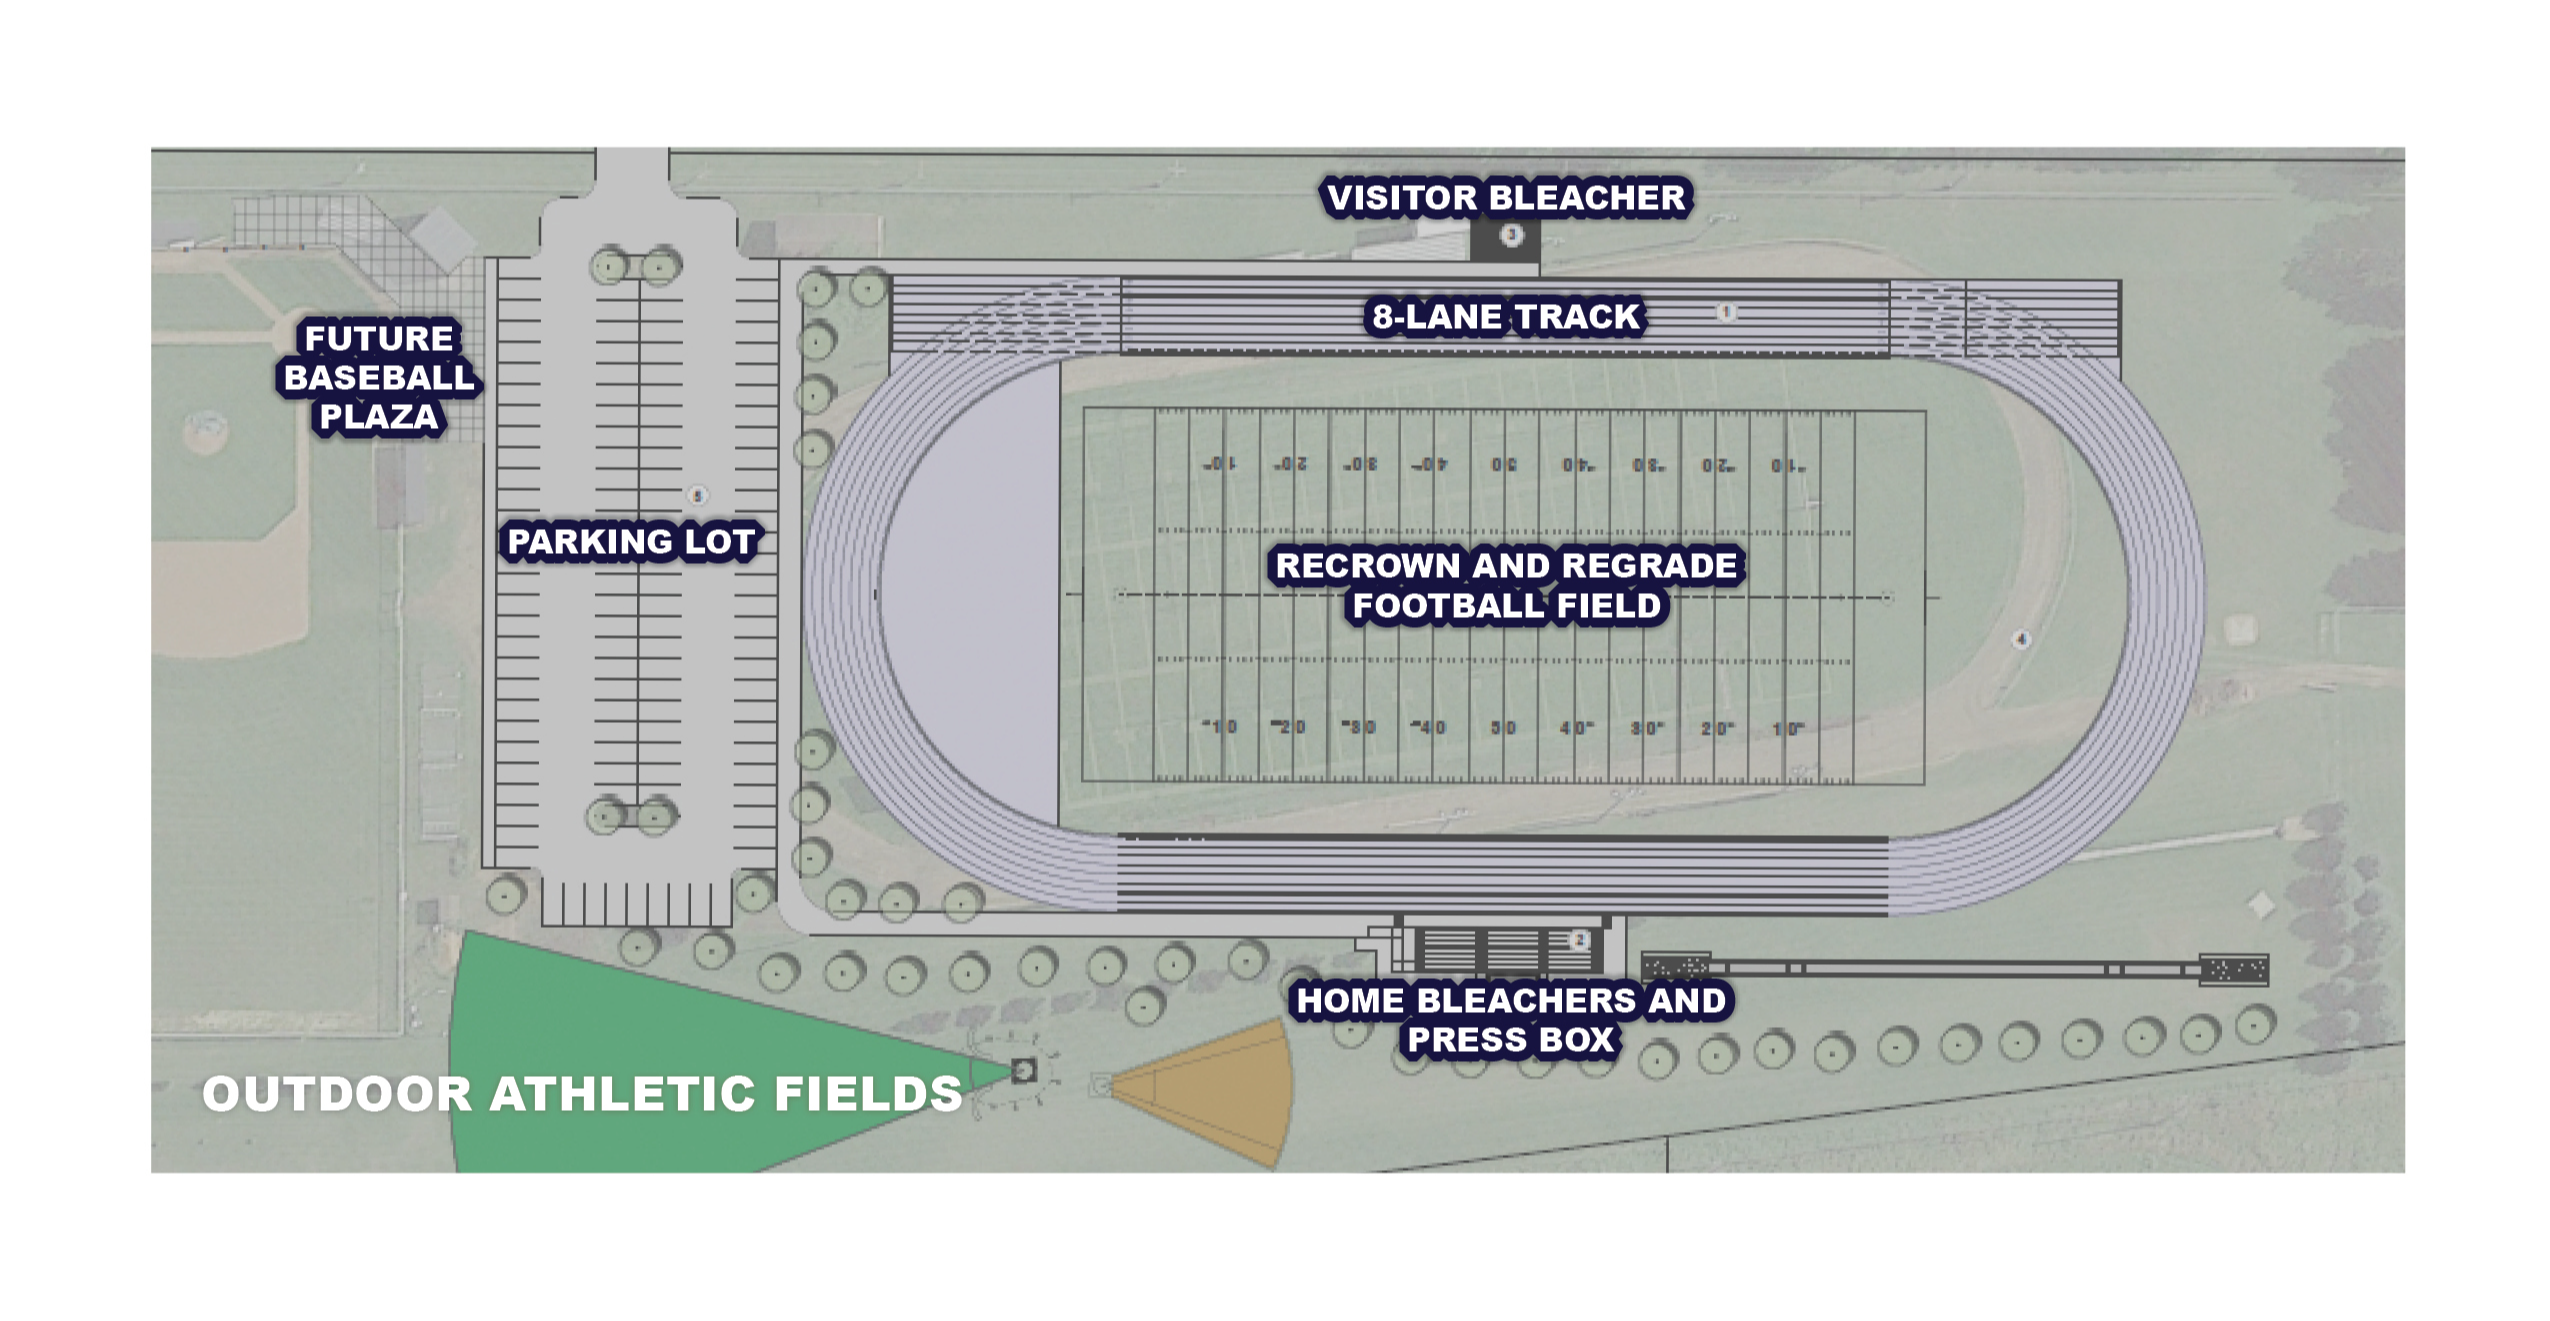 Picture of Outdoor Athletic Fields Map - Future Baseball Plaza, Parking Lot, Recrown and Regrade Football Field, Home Bleachers and Press Box, Visitor Bleachers, 8-Lane Track